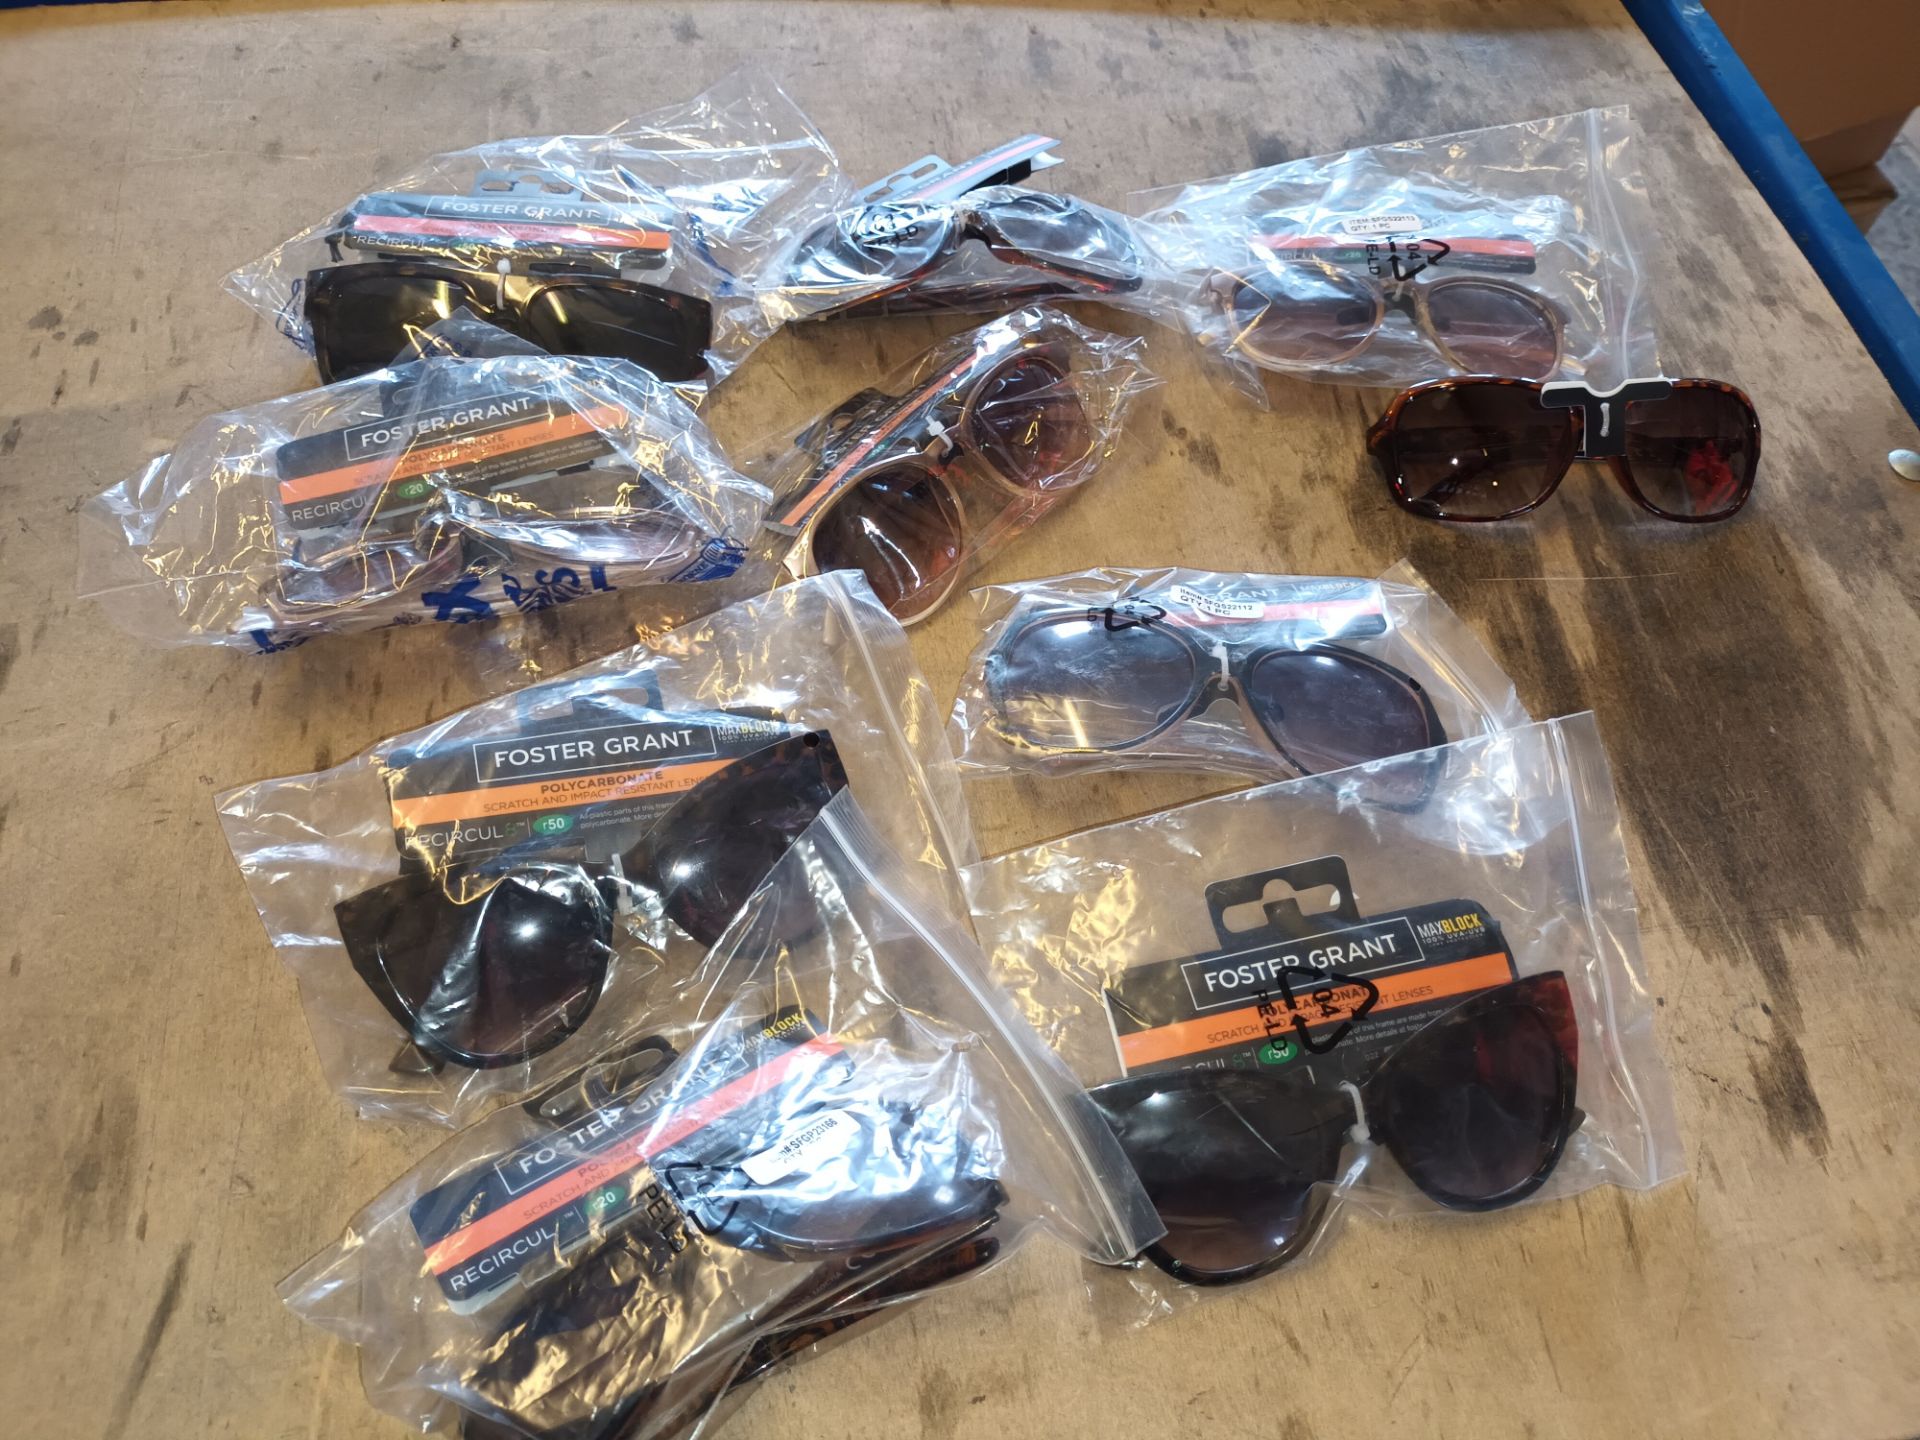 APPROX 300 X SCRATCH RESISTANT SUNGLASSES LOTS OF DIFFERENT STYLES